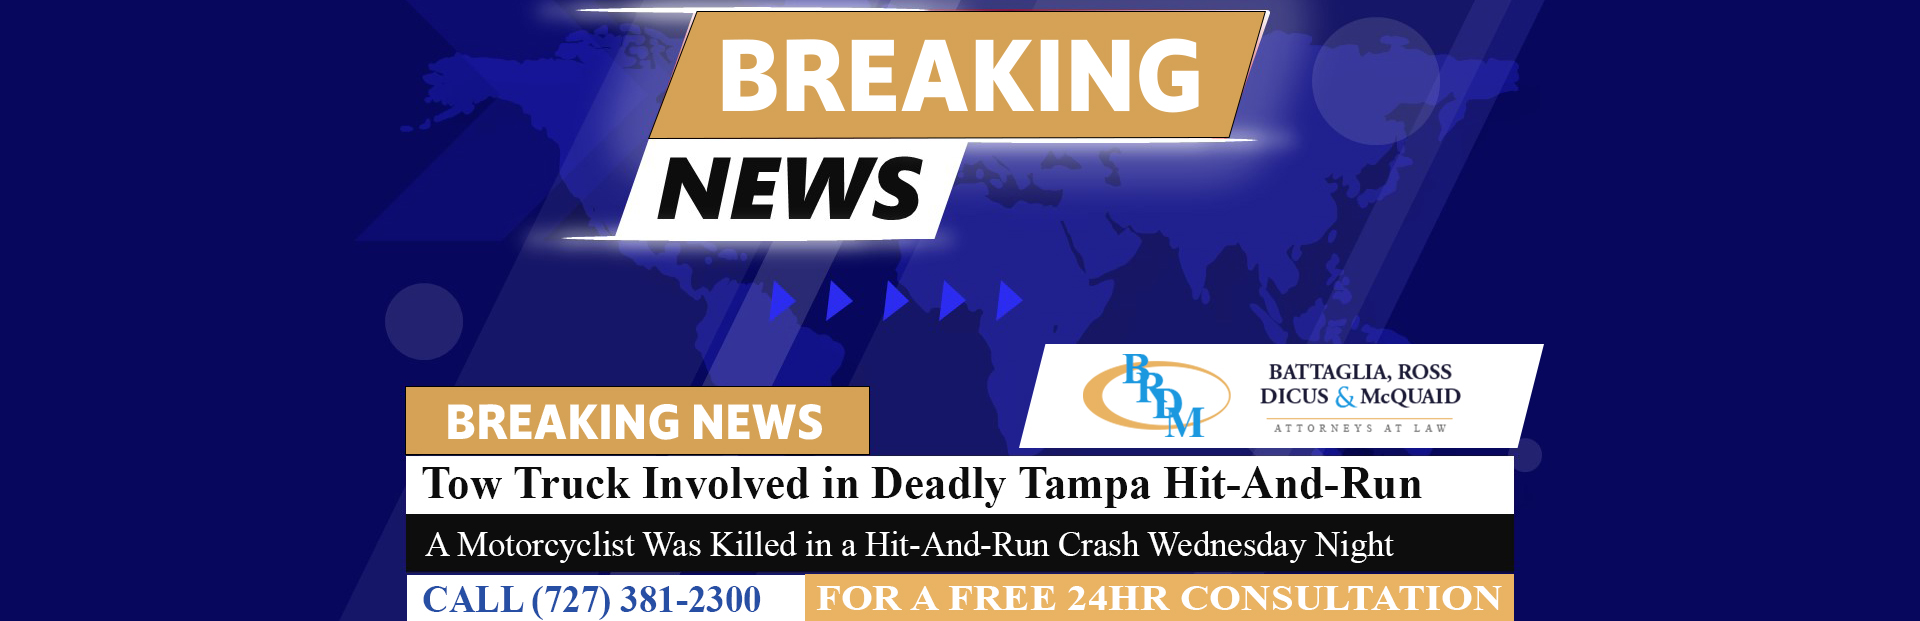 [01-20-23] Tow Truck Carrying School Bus Involved in Deadly Tampa Hit-And-Run